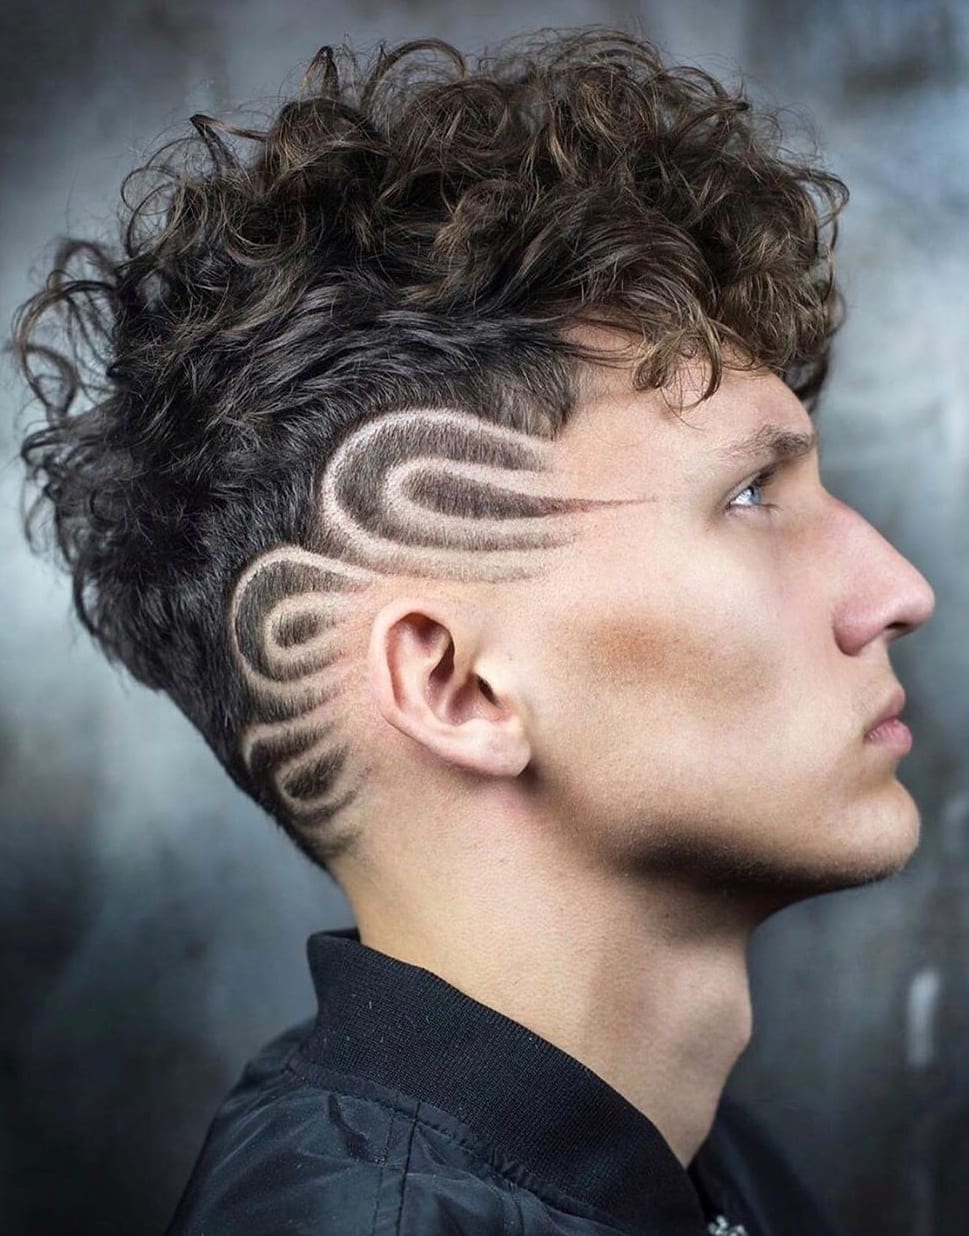 Fade Design Haircut for Men to rock in 2020